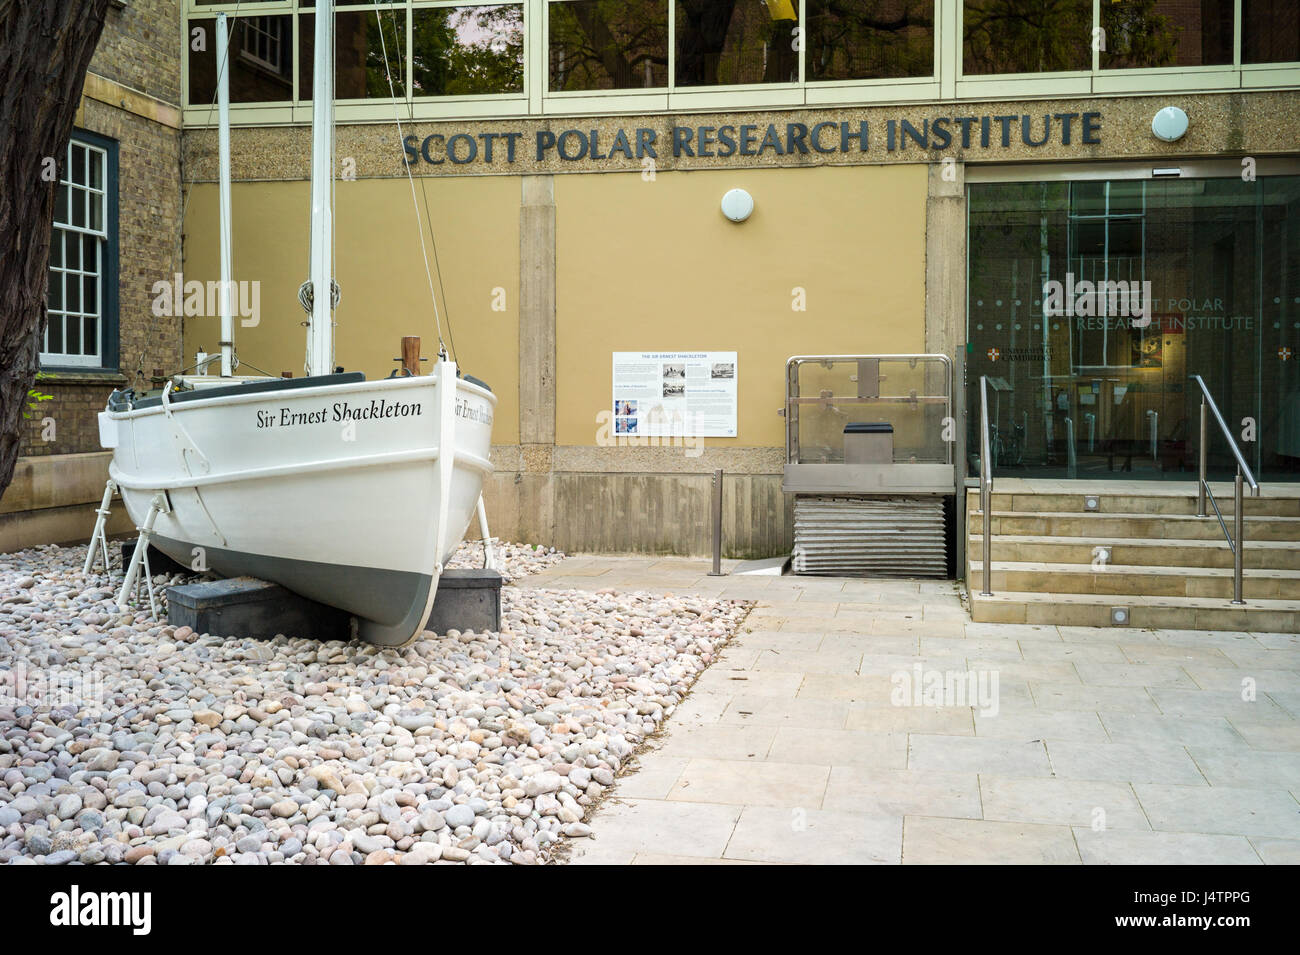 Entrance to the Scott Polar Research Institute in Lensfield Road, Cambridge. The Institute is part of the University of Cambridge. Stock Photo